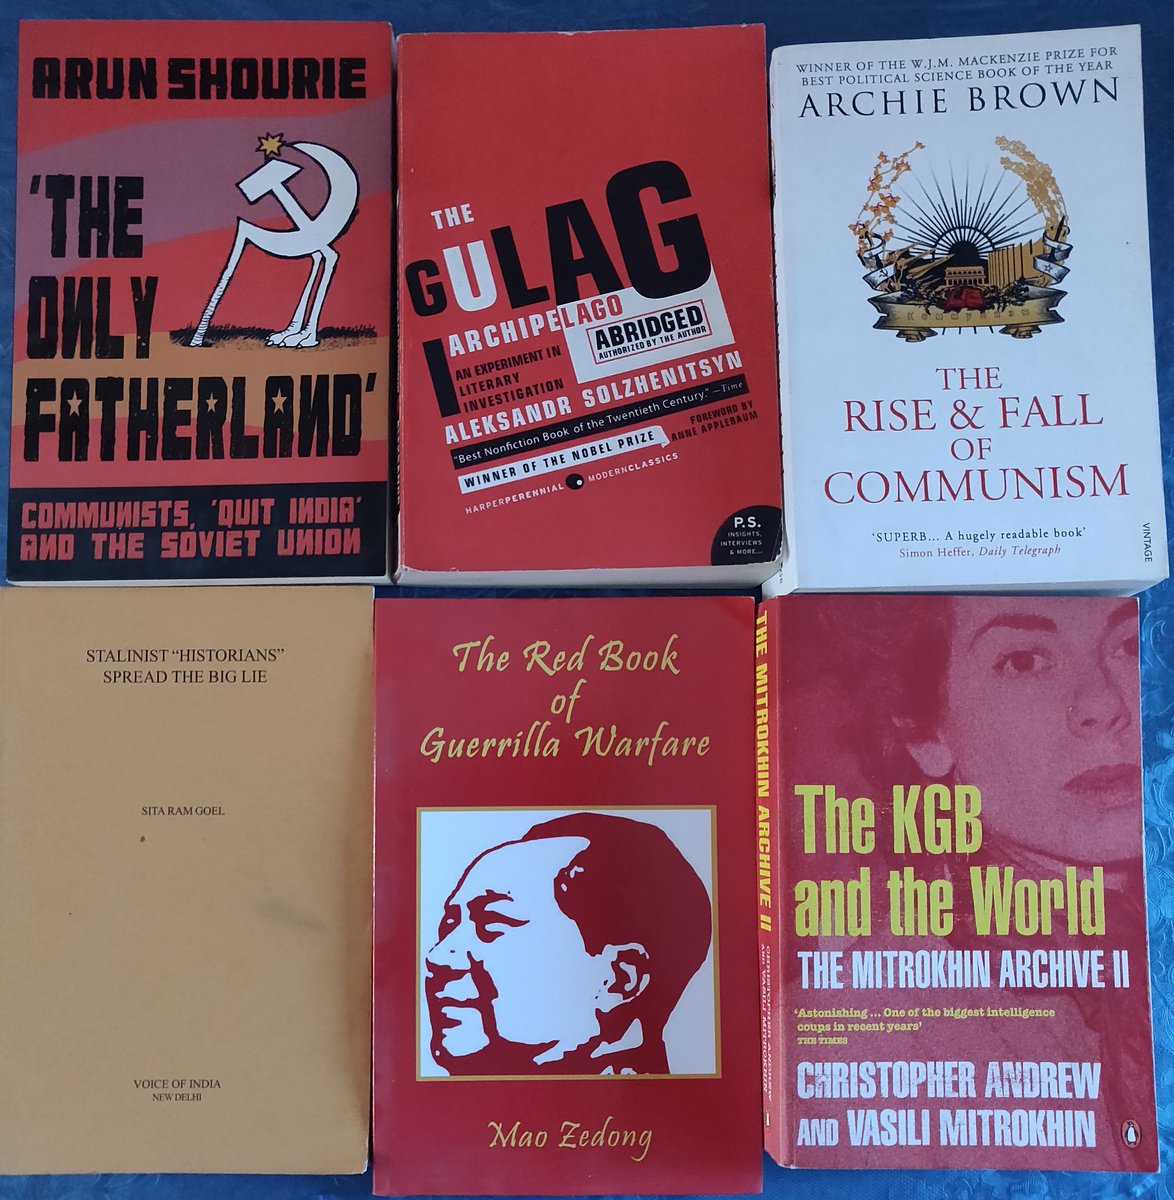 Young ones who follow me, this is your intel dose for next 3 months.Read these 6 books to begin with.These will help you take down any Empty Top Floor Hollow Woke Liberal (well in one word - Communist).